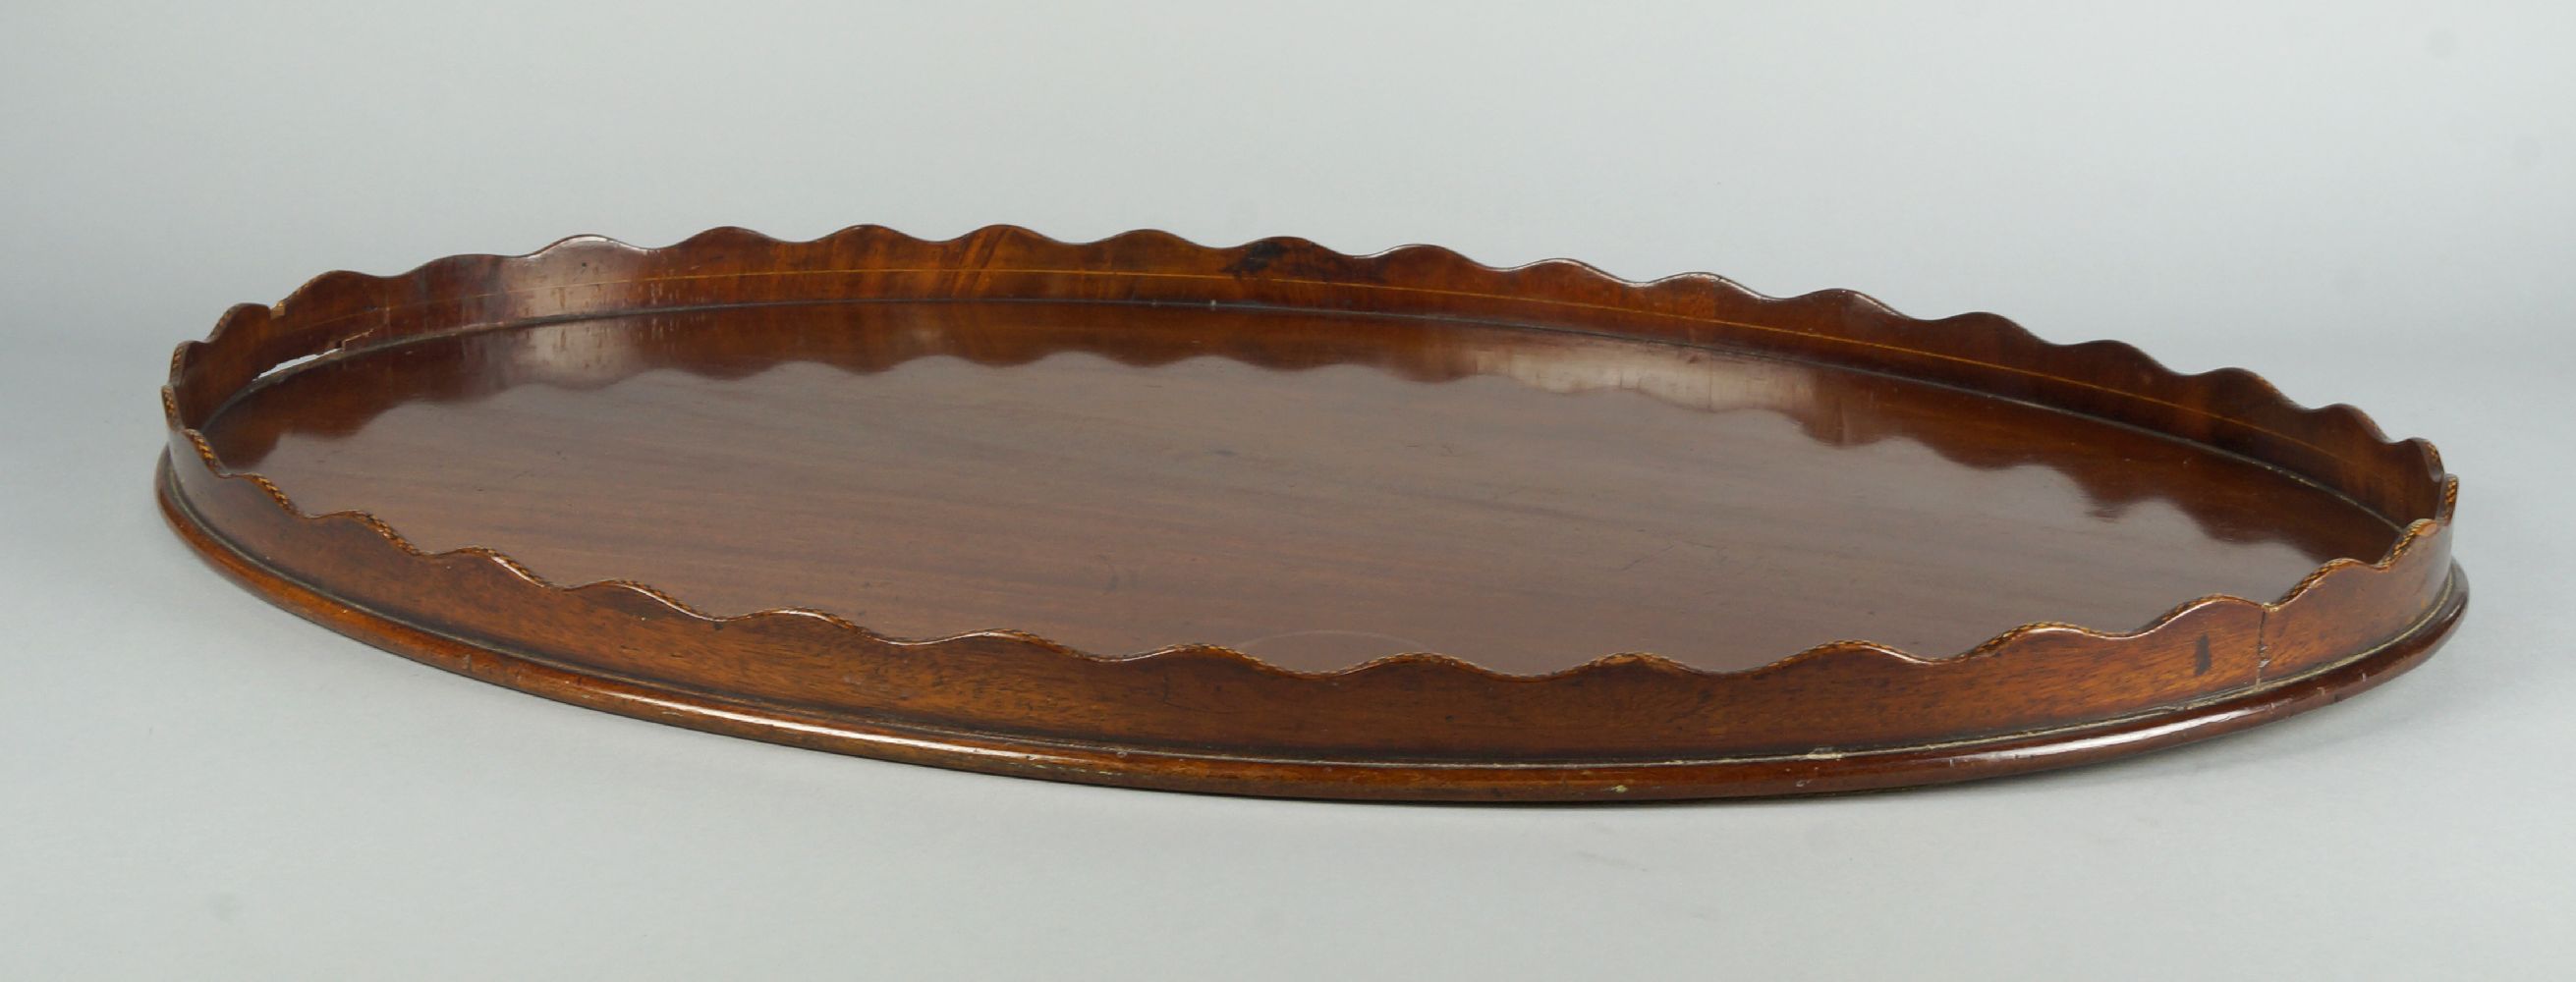 A large oval mahogany tray, late 19th/early 20th century, with a wavy edged gallery inset with